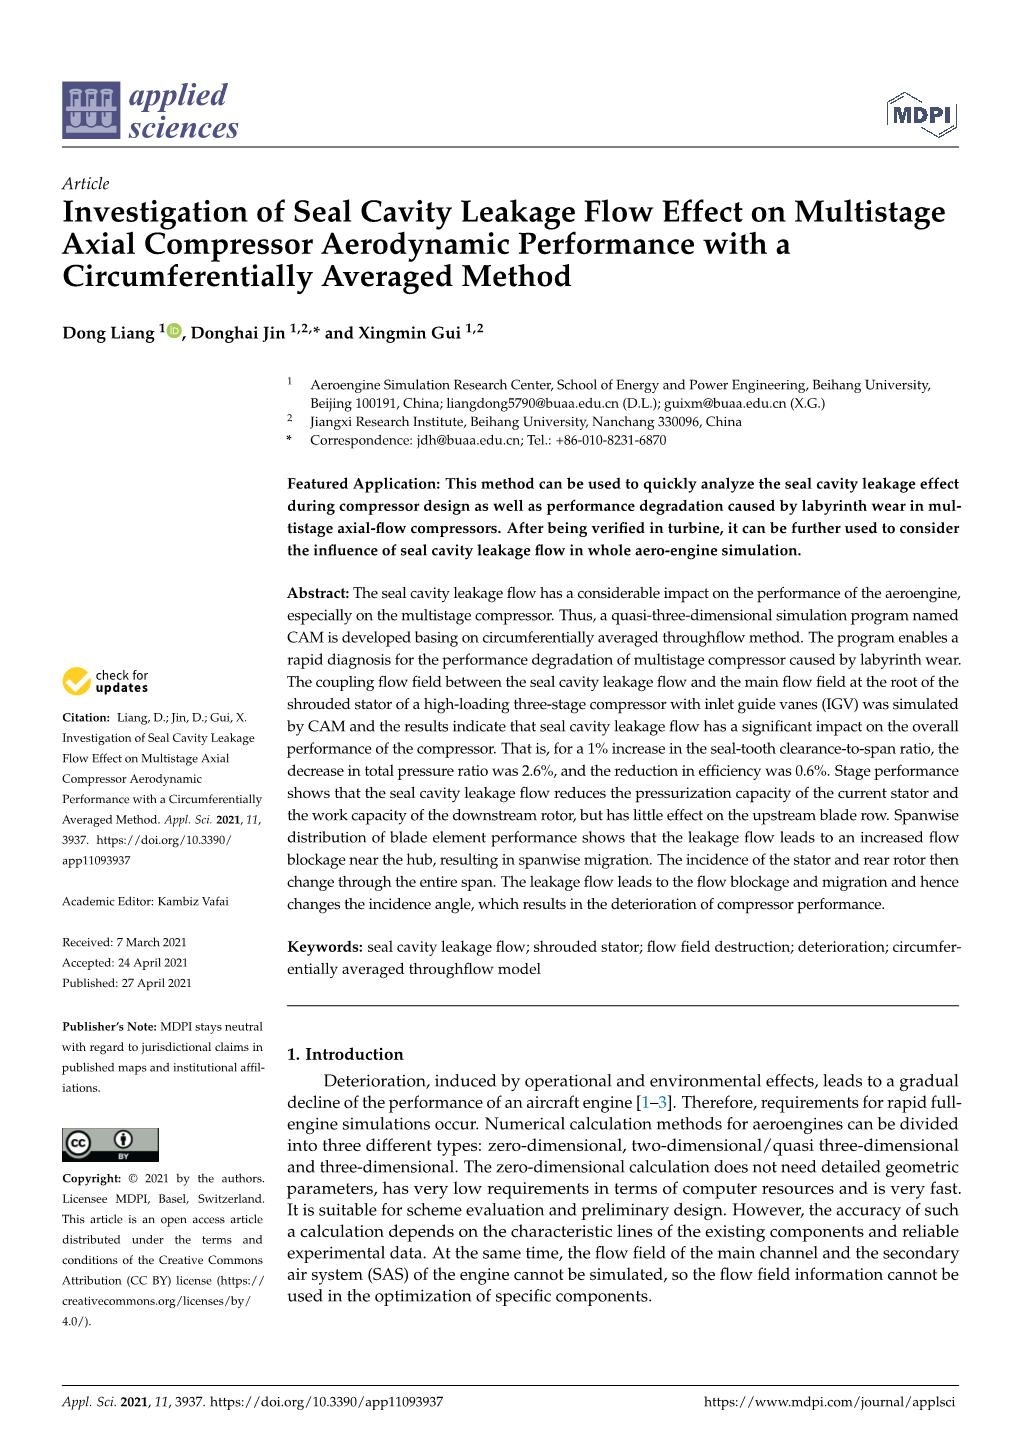 Investigation of Seal Cavity Leakage Flow Effect on Multistage Axial Compressor Aerodynamic Performance with a Circumferentially Averaged Method